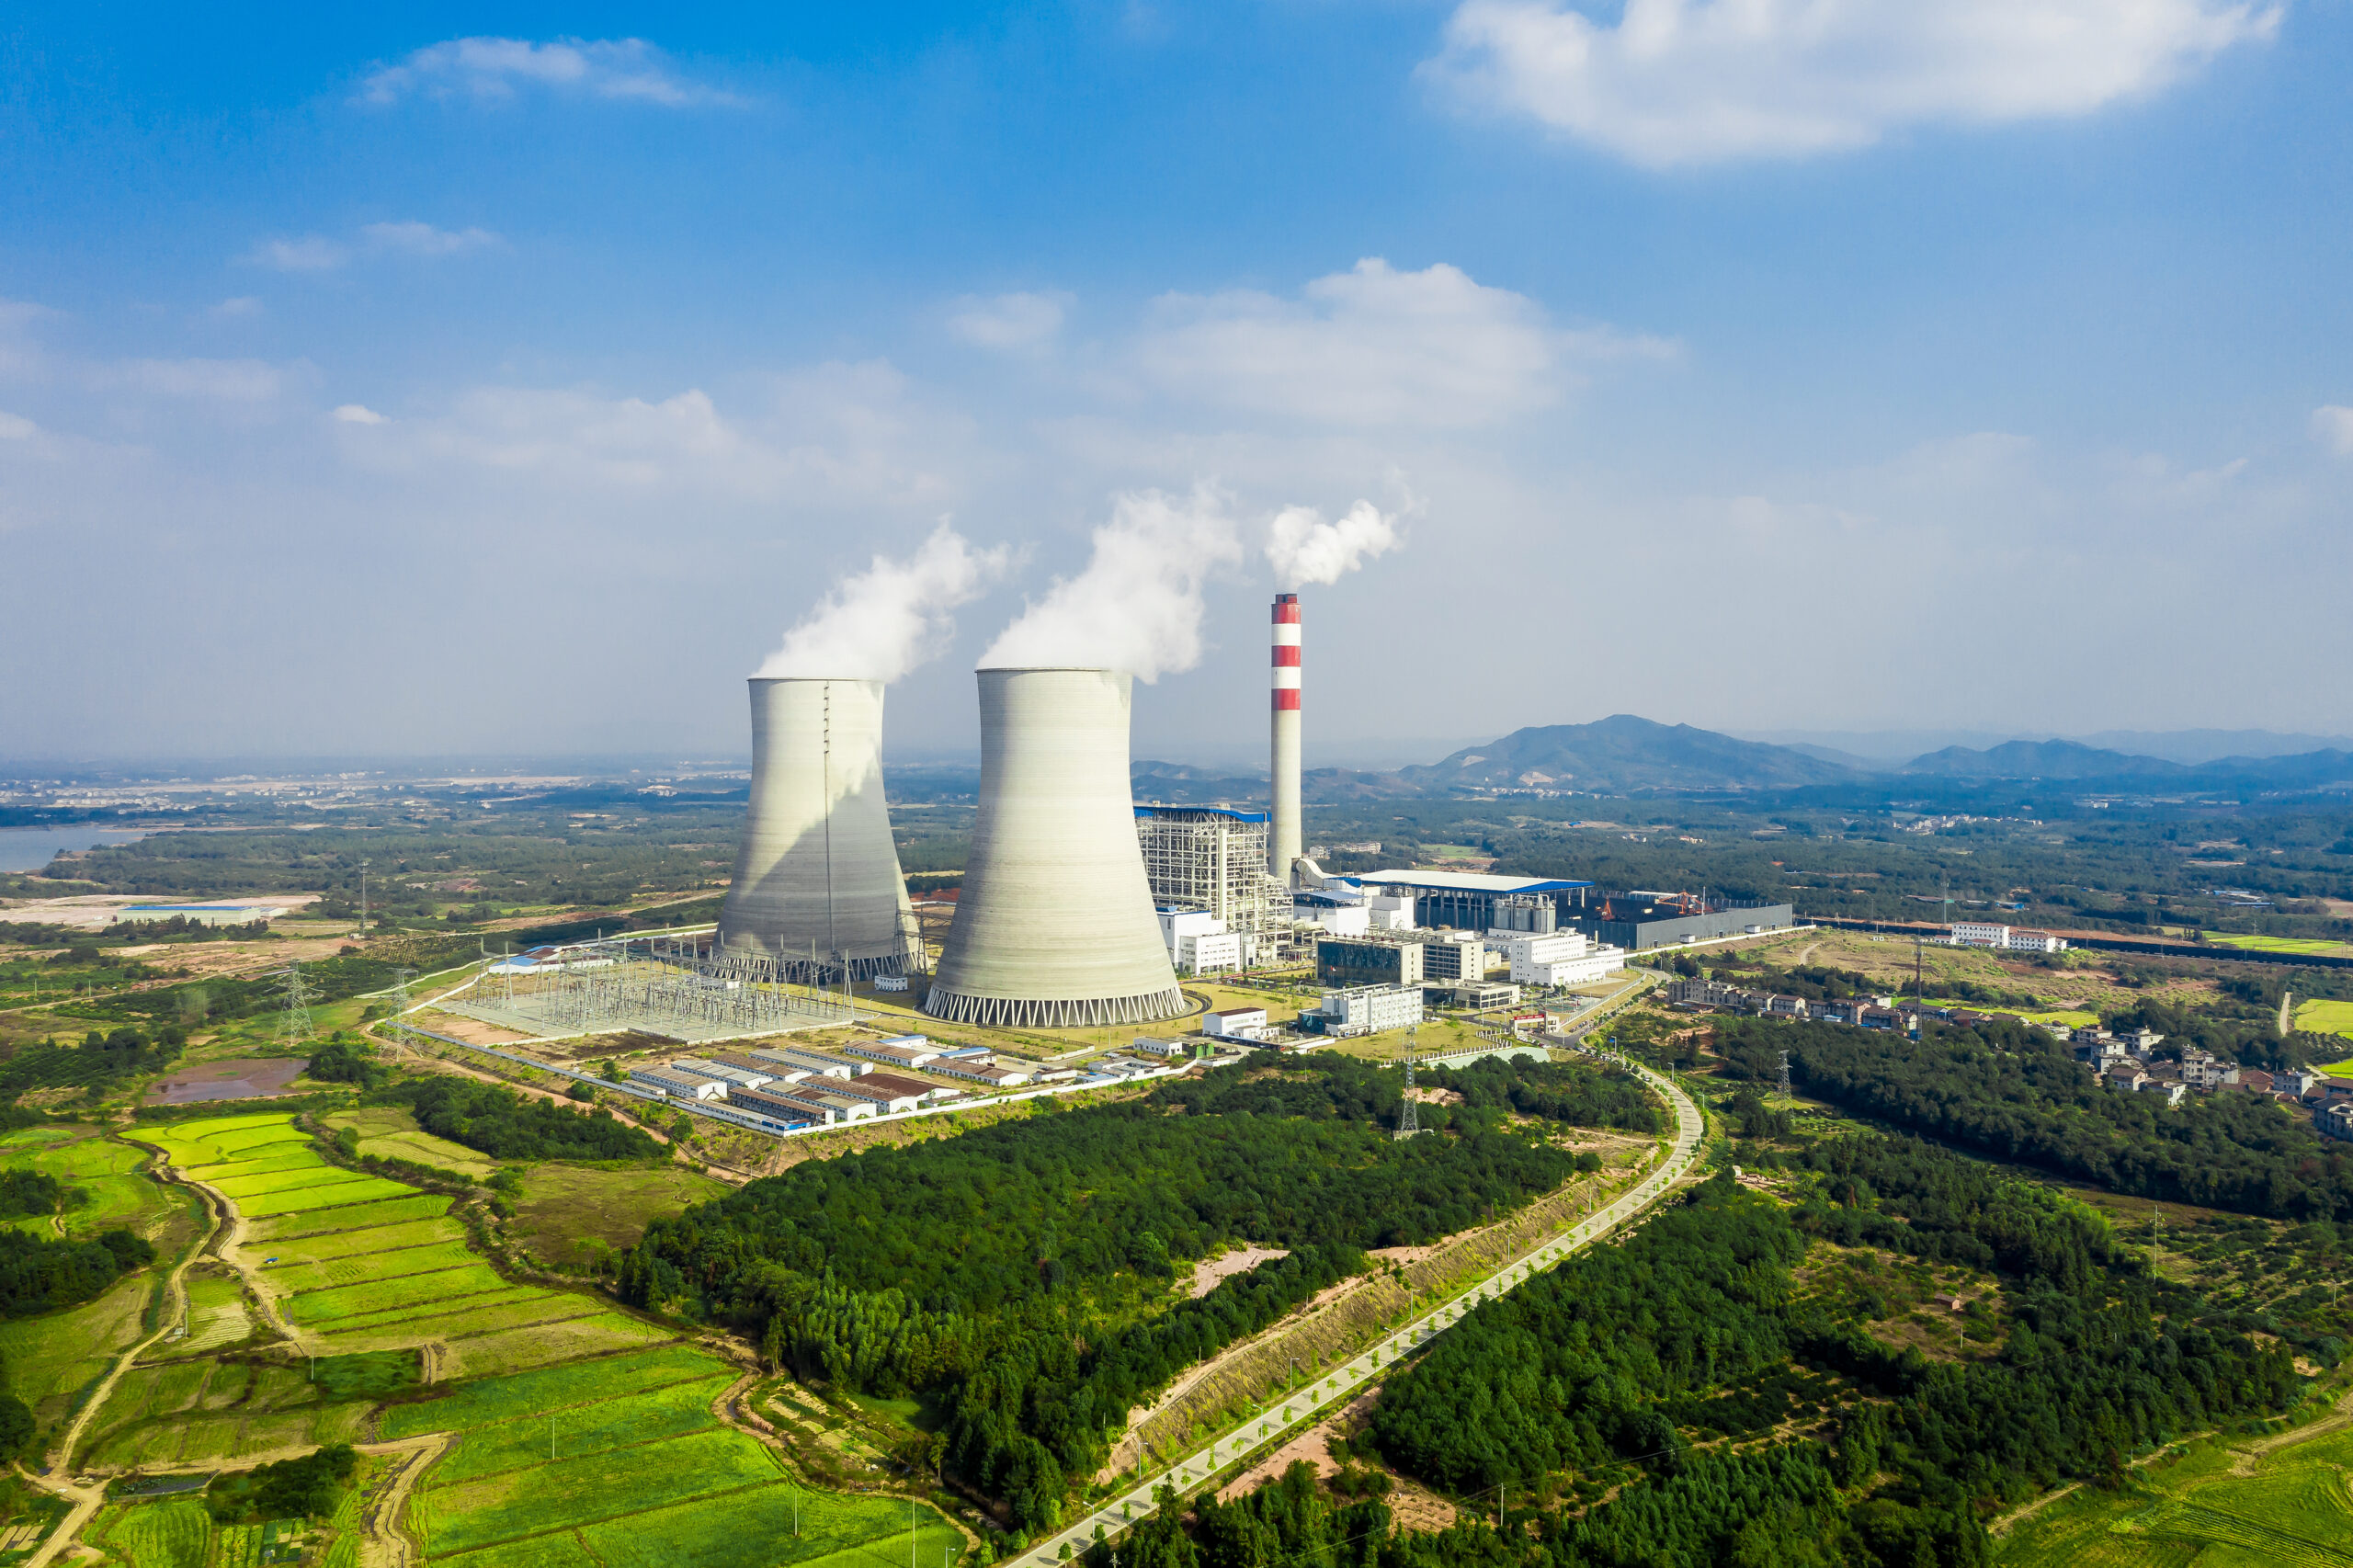 aerial view of modern power plant, industrial landscape